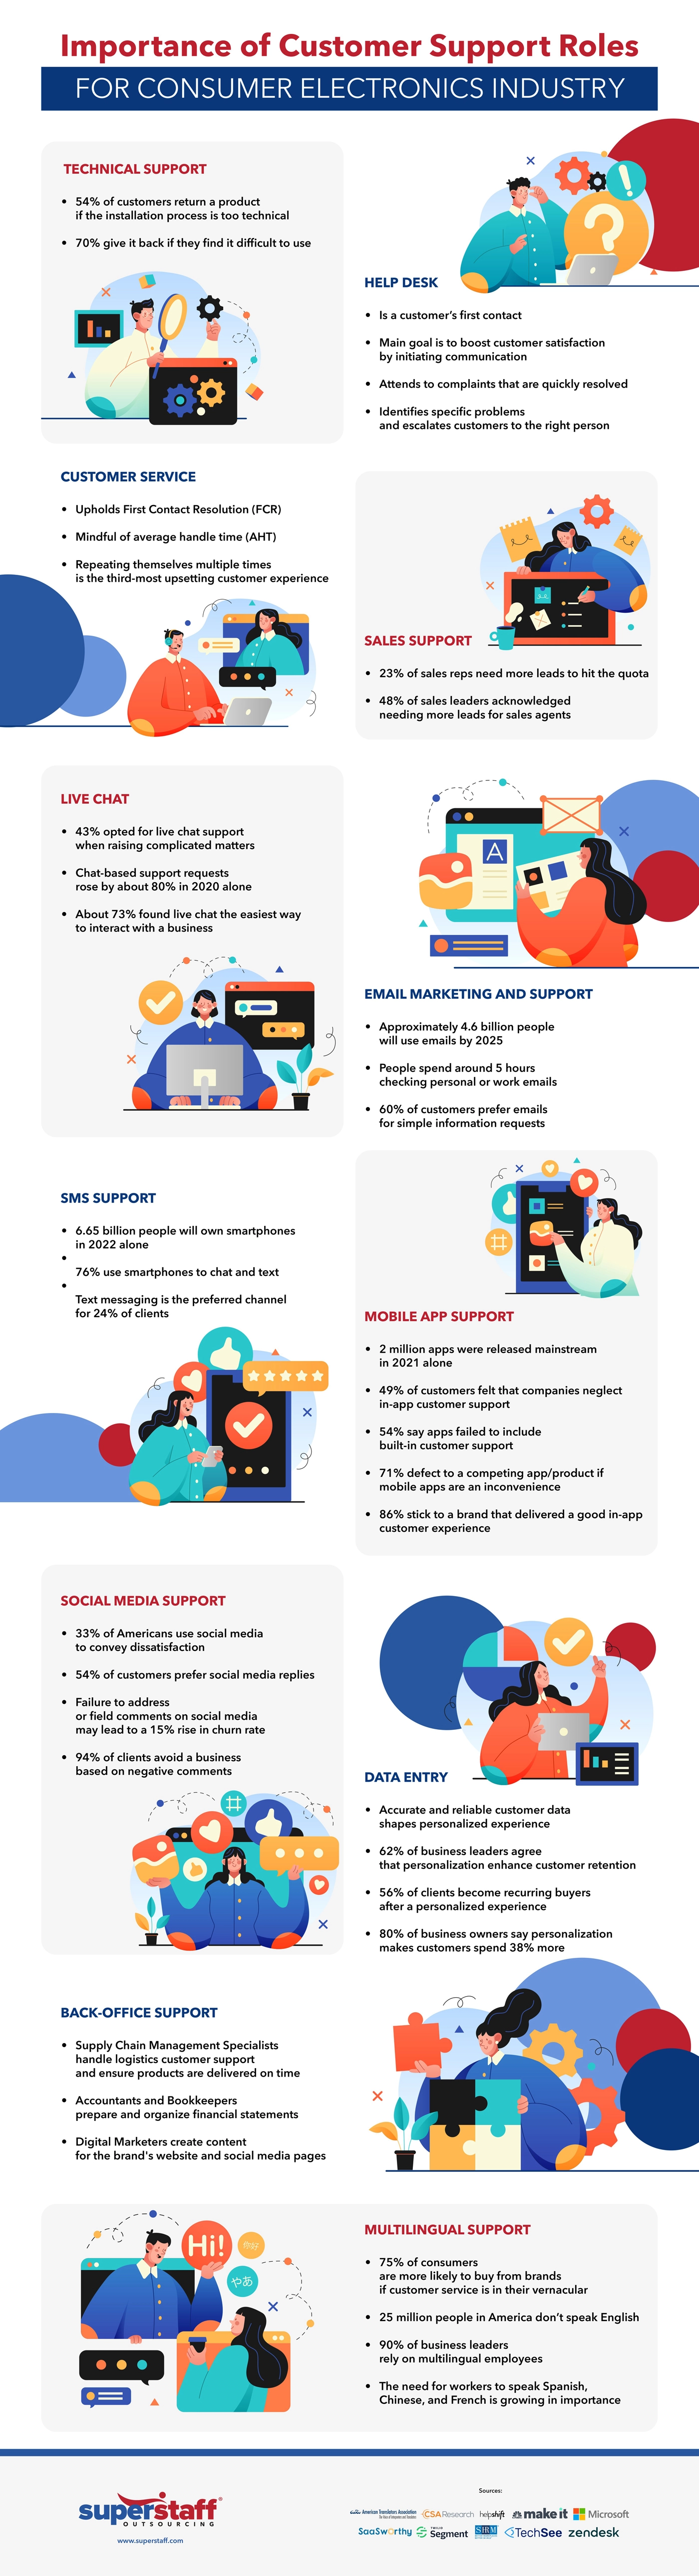 Importance of Customer Support Roles Infographic